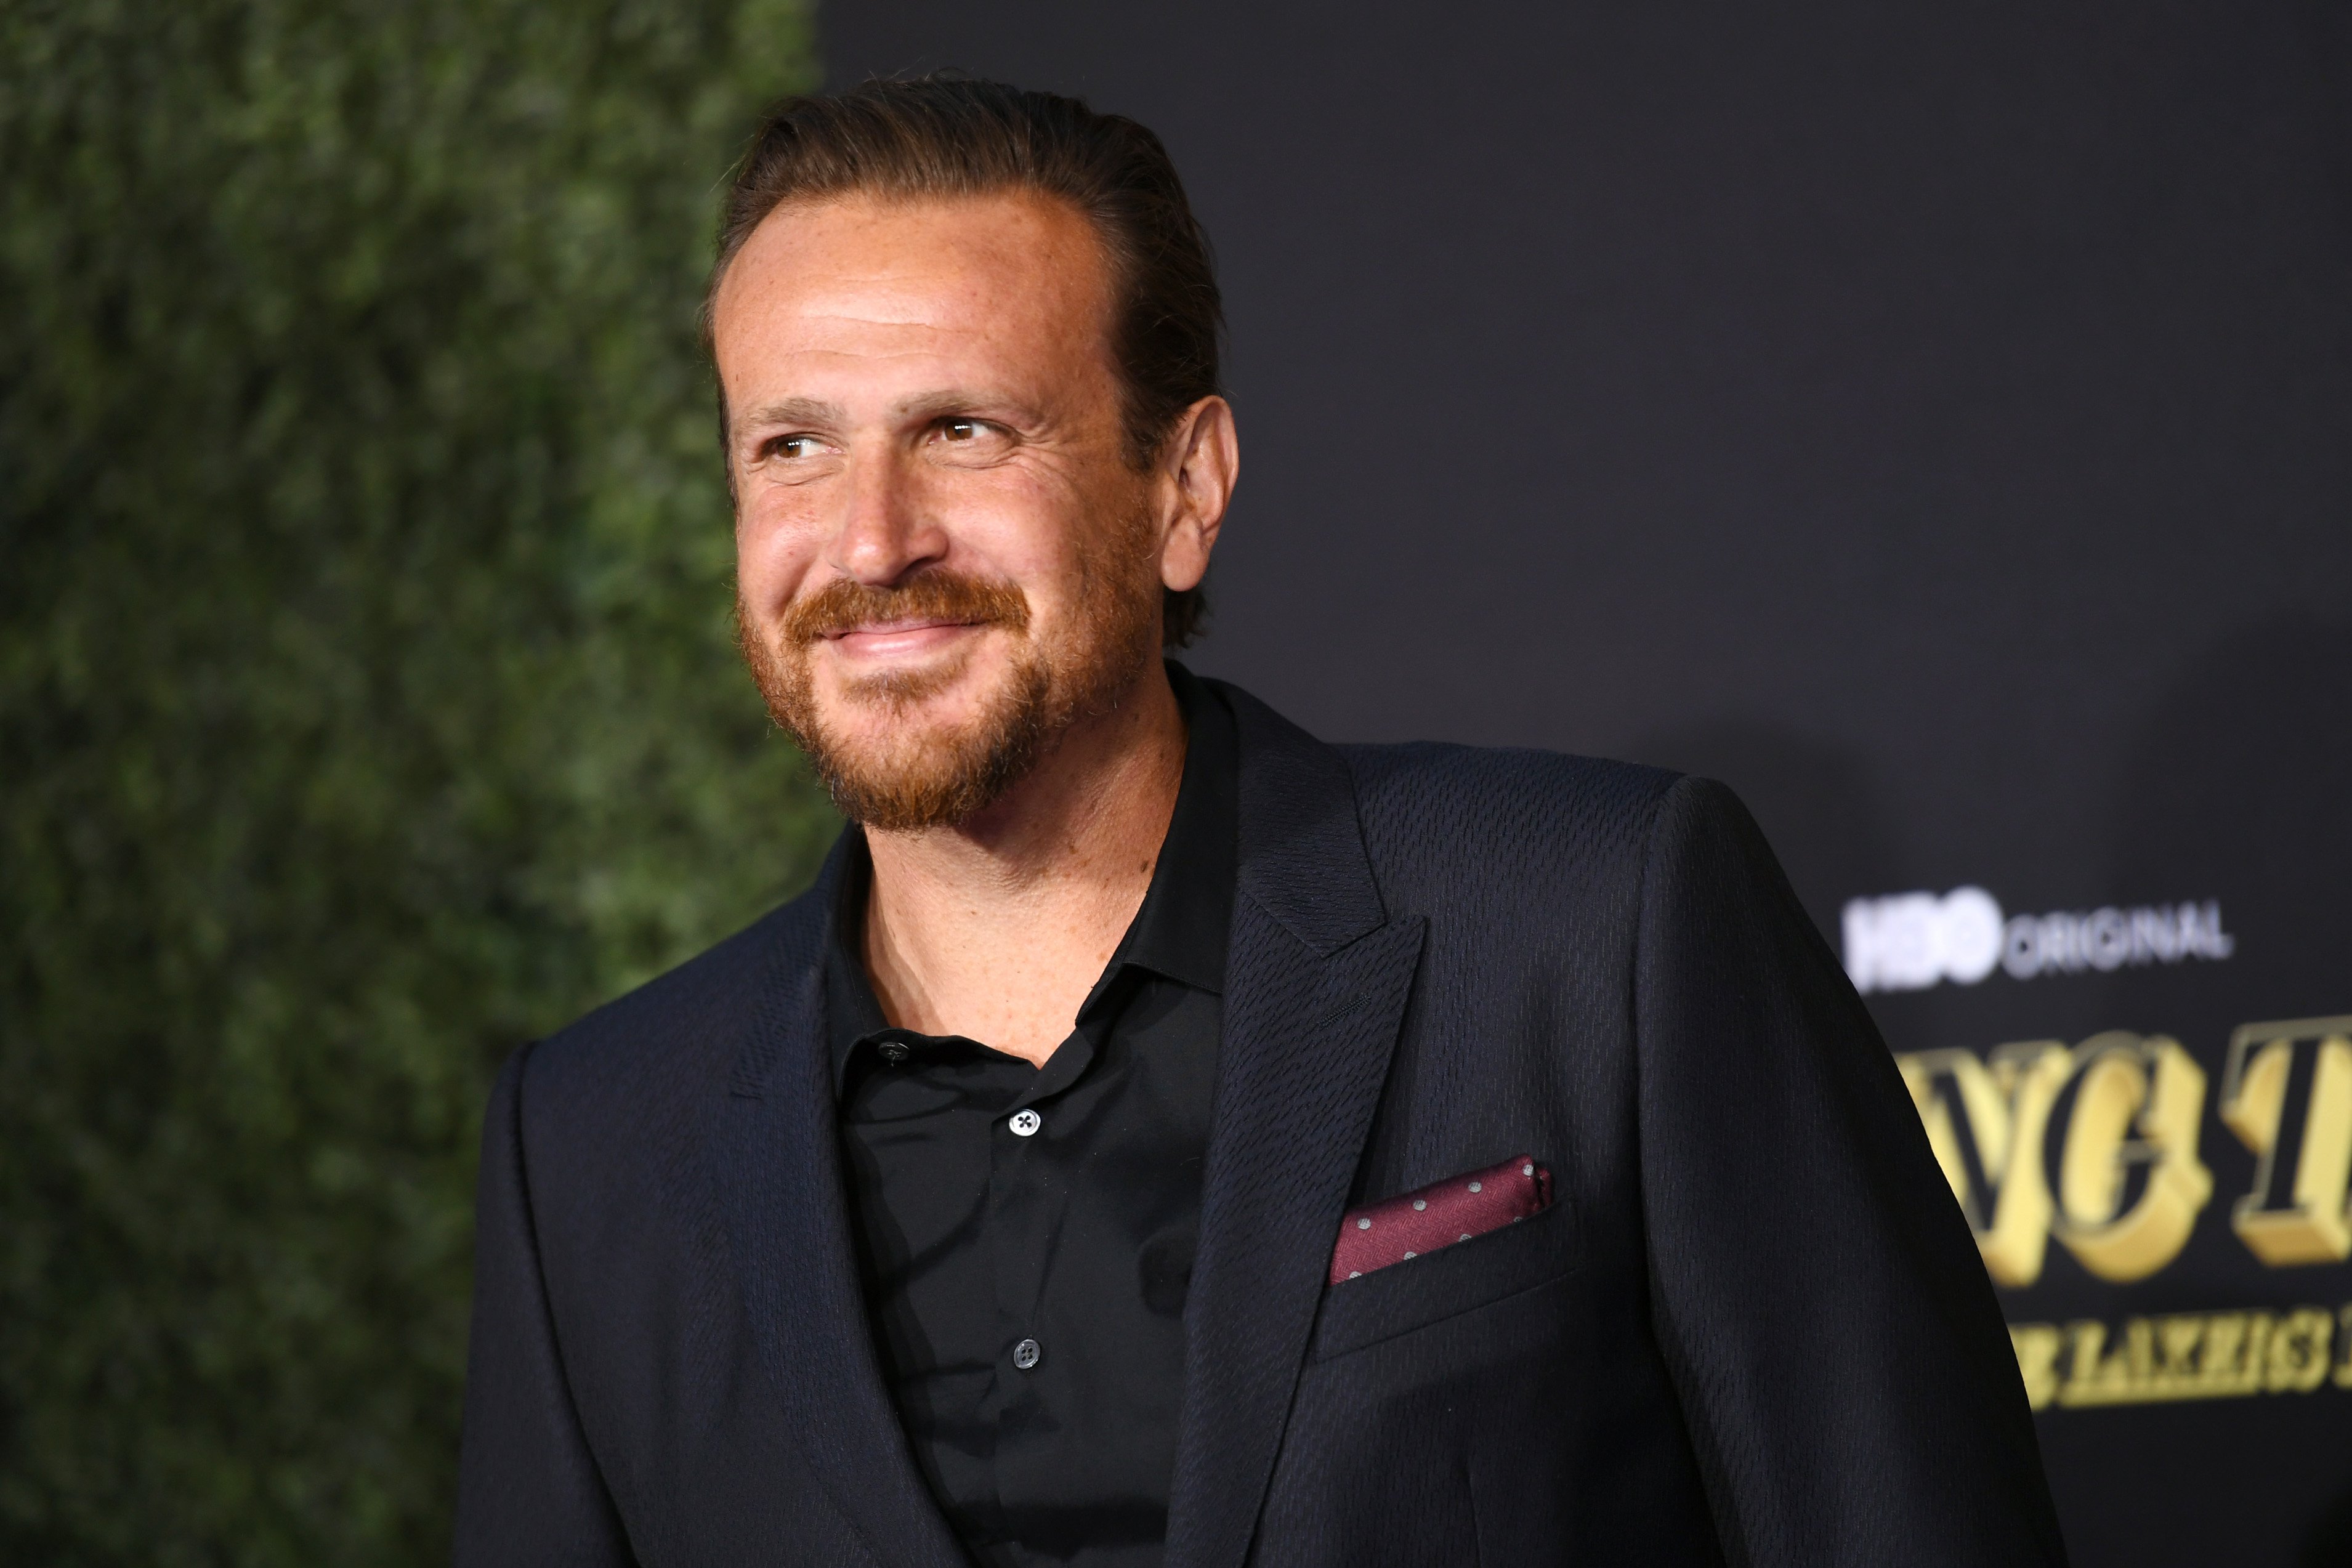  Jason Segel at the premiere of HBO's "Winning Time: The Rise Of The Lakers Dynasty" on March 2, 2022, in Los Angeles, California. | Source: Getty Images